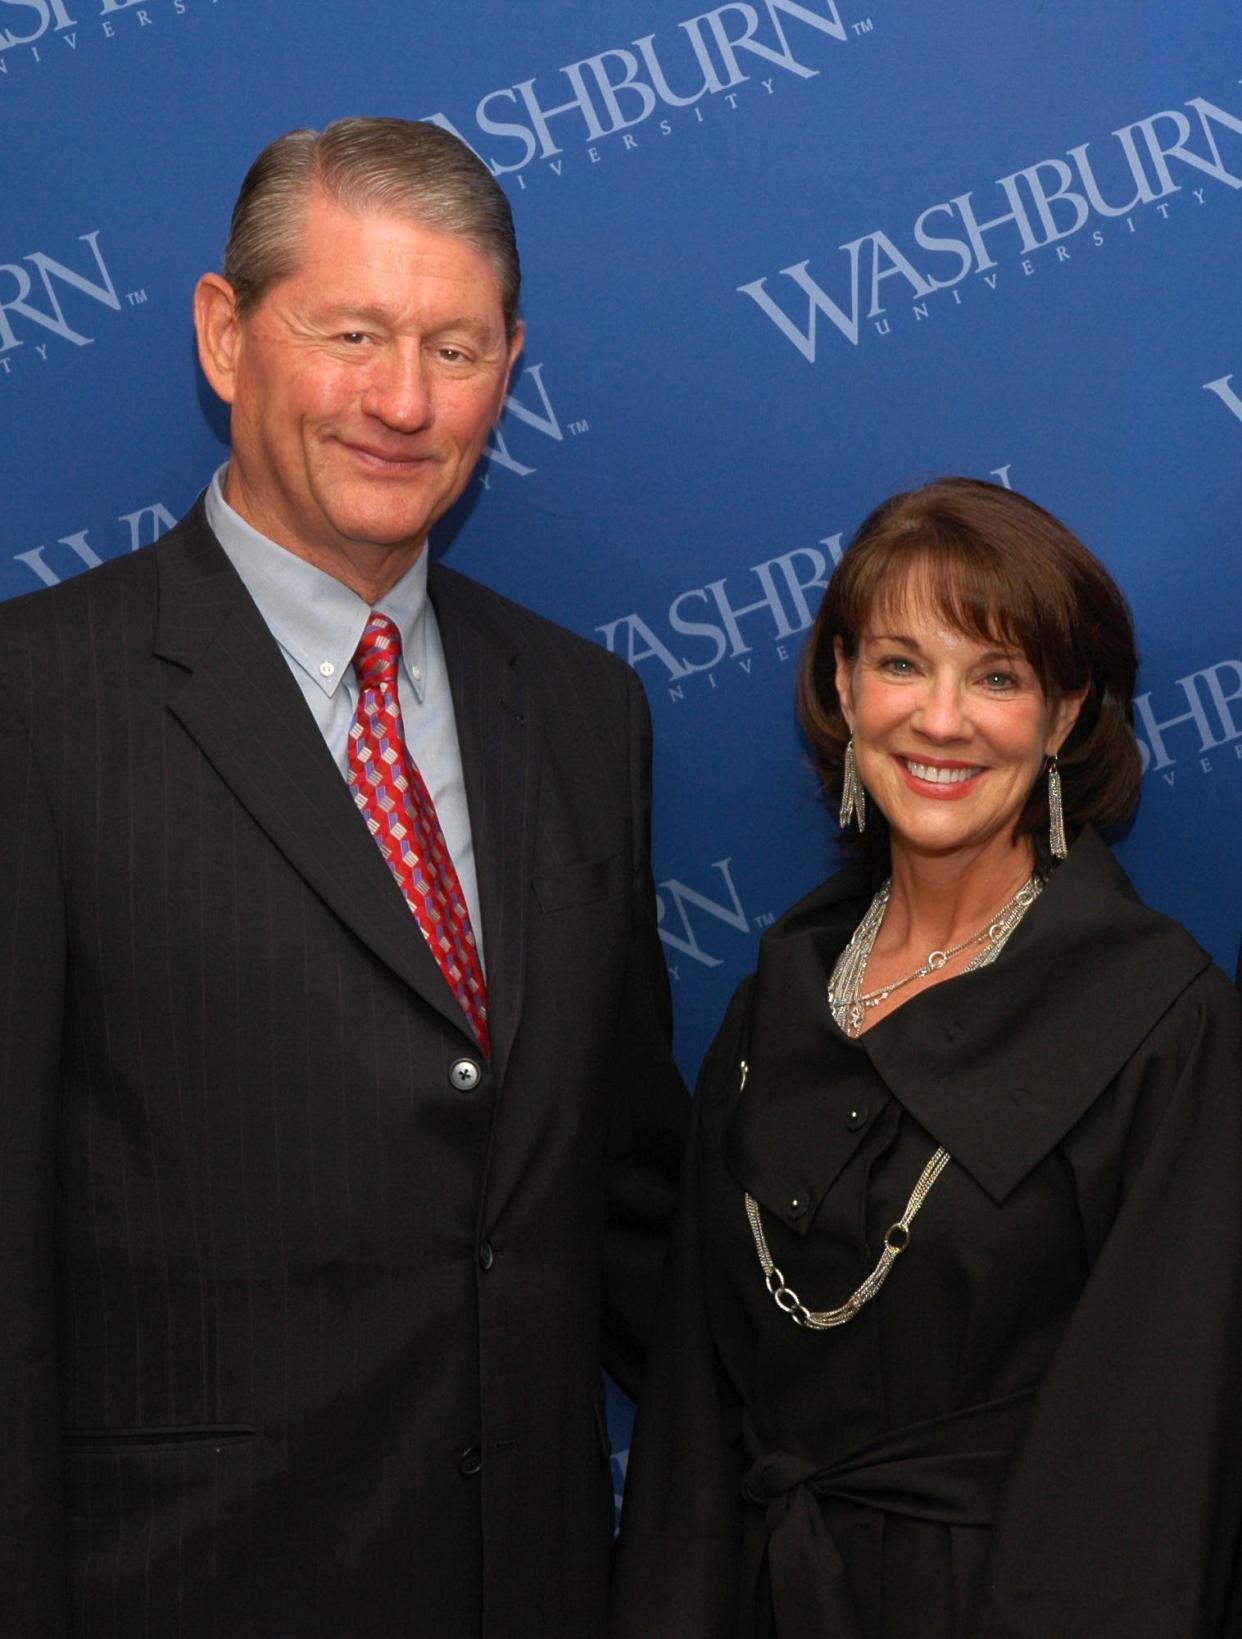 Dick and Trish Davidson donated $5 million for scholarships at Washburn University. This is Washburn's highest single donation for a scholarship fund.